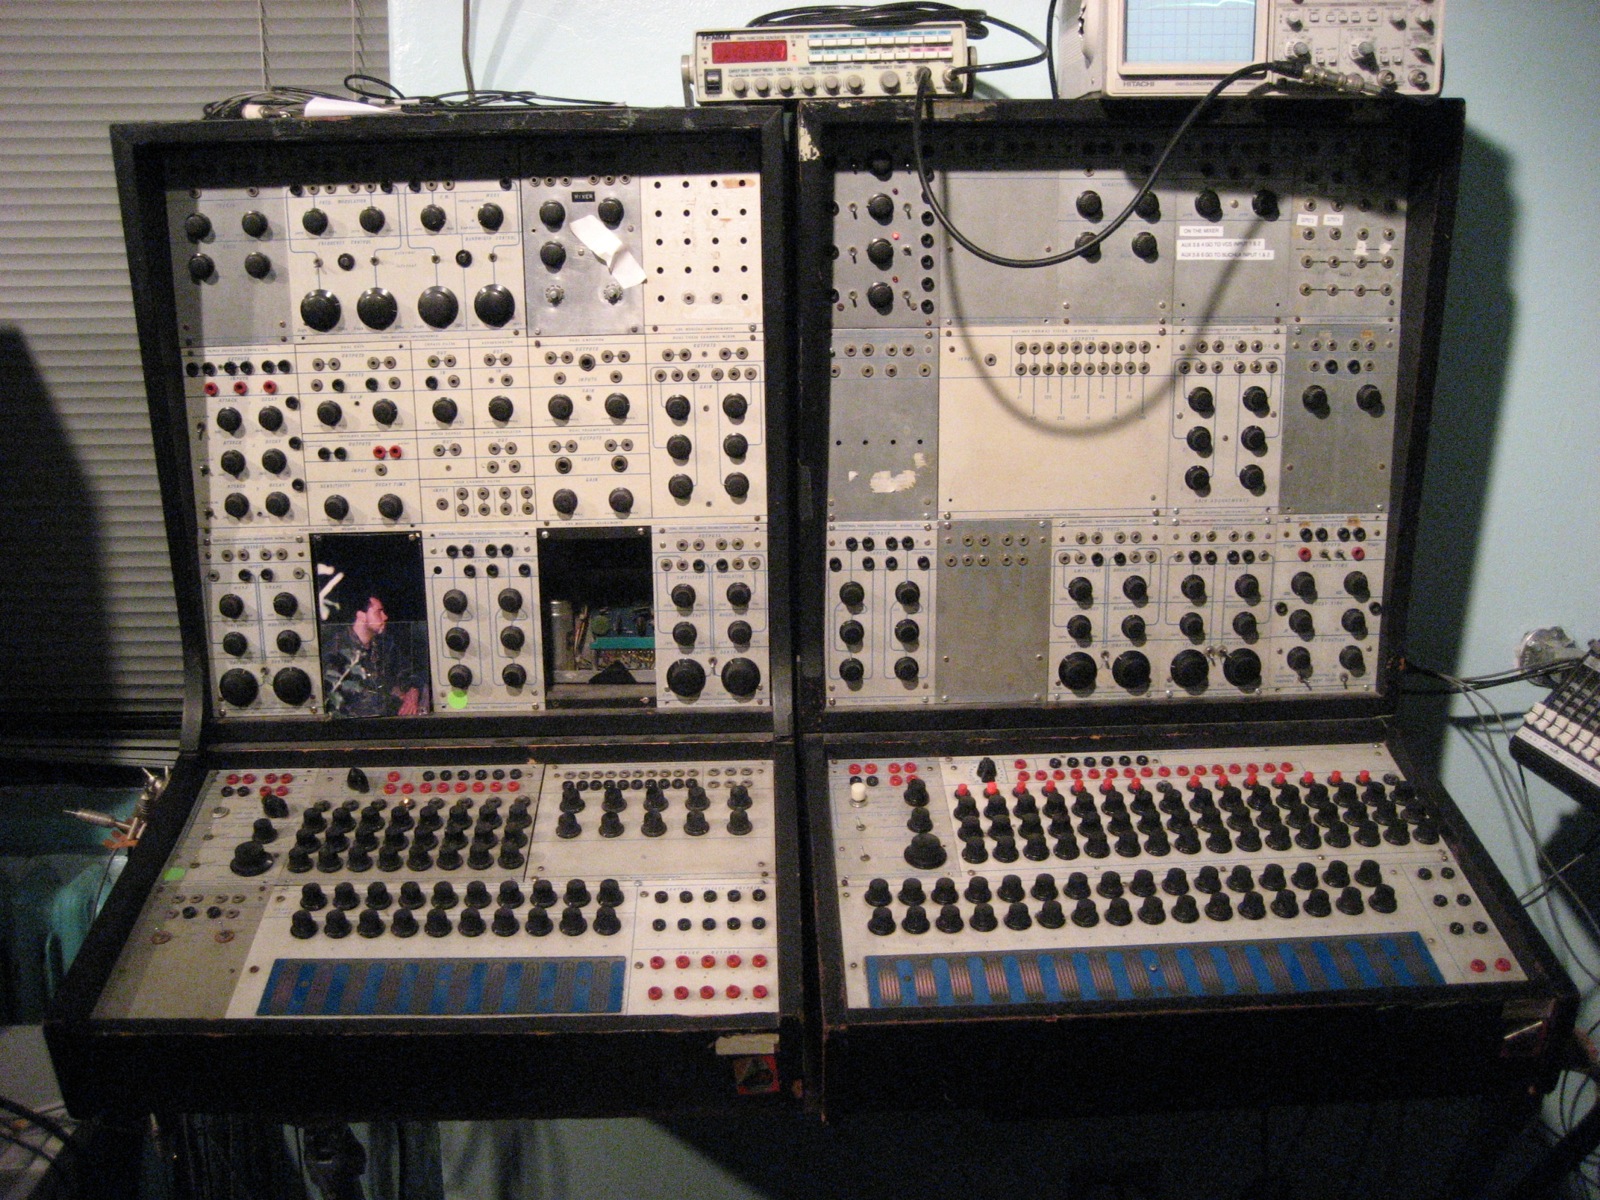 Buchla 100 series (By Bennett - originally posted to Flickr as NYU's Buchla 100 series, CC BY-SA 2.0, https://commons.wikimedia.org/w/index.php?curid=9039000)